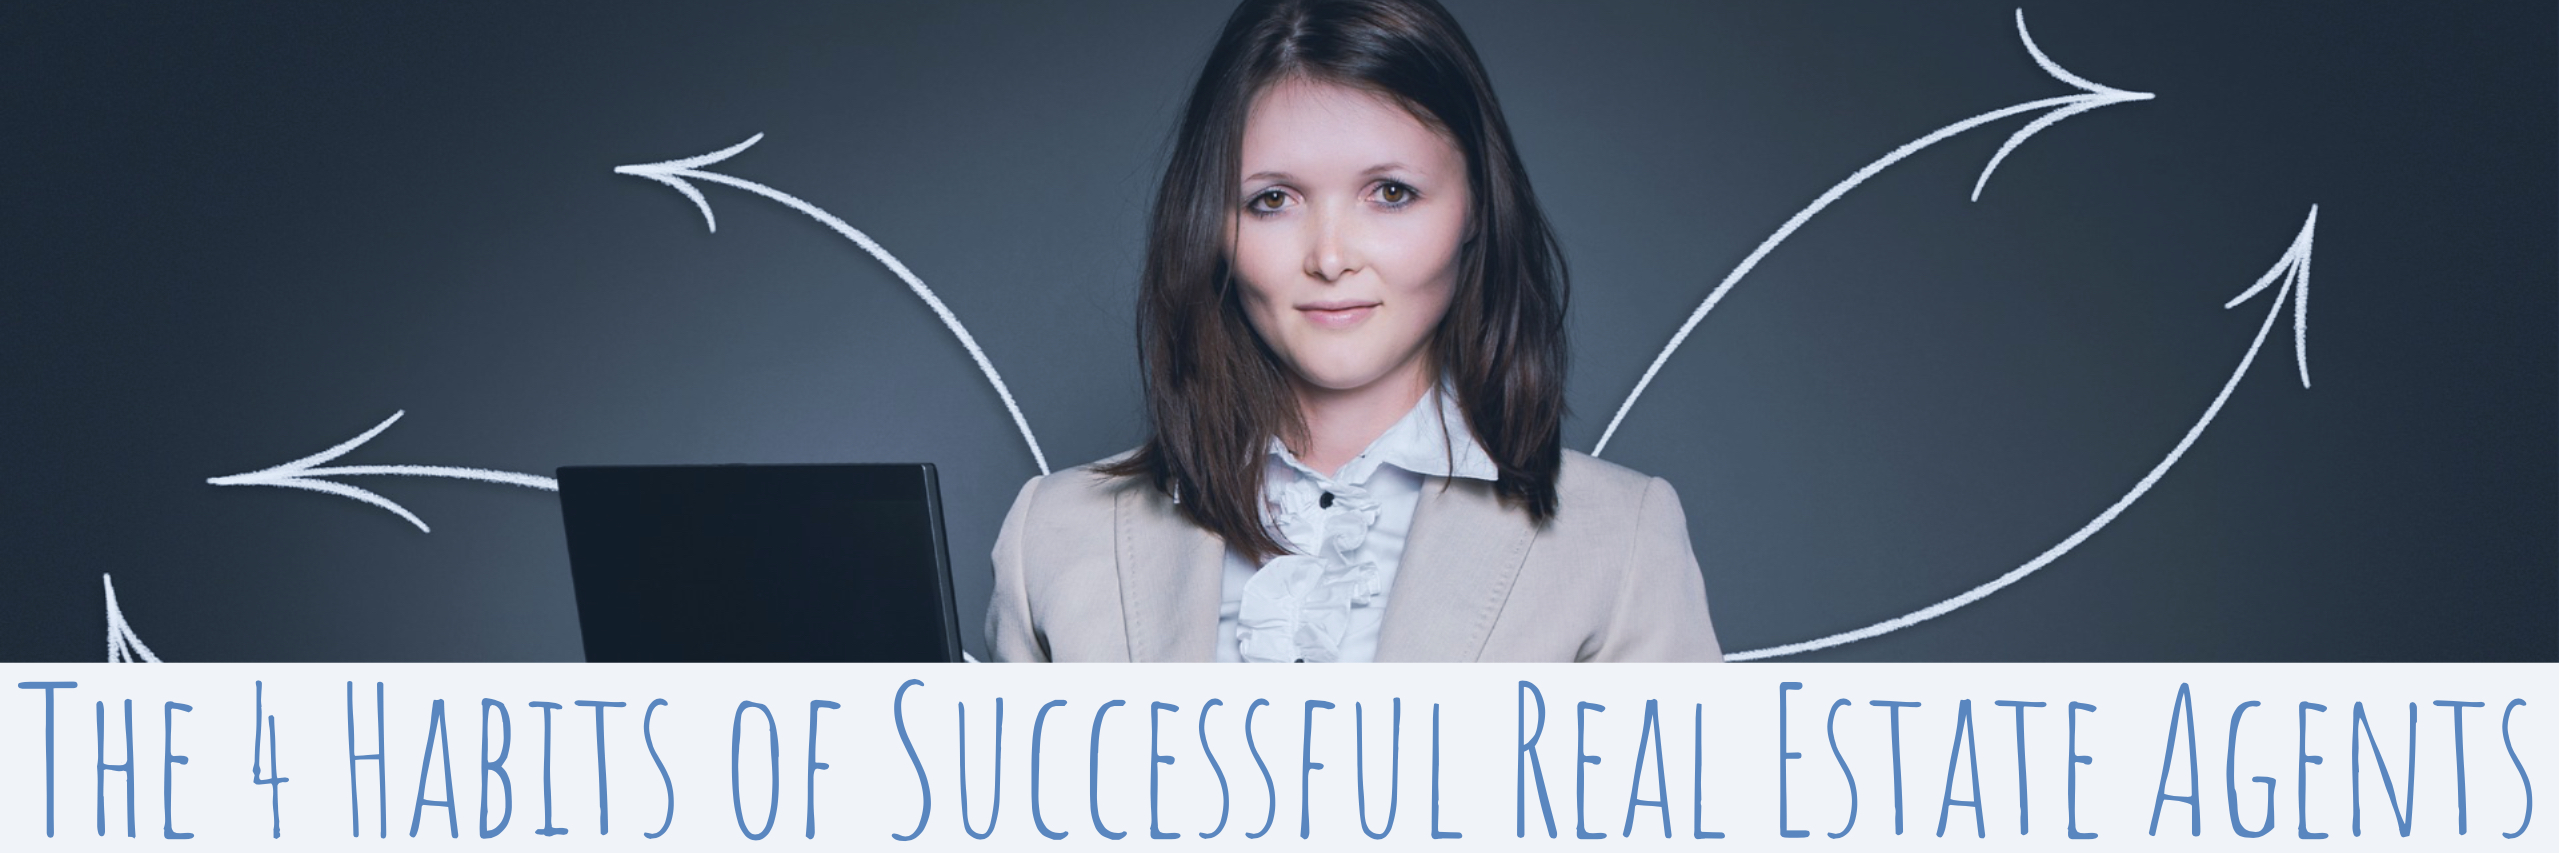 The 4 Habits of Successful Real Estate Agents